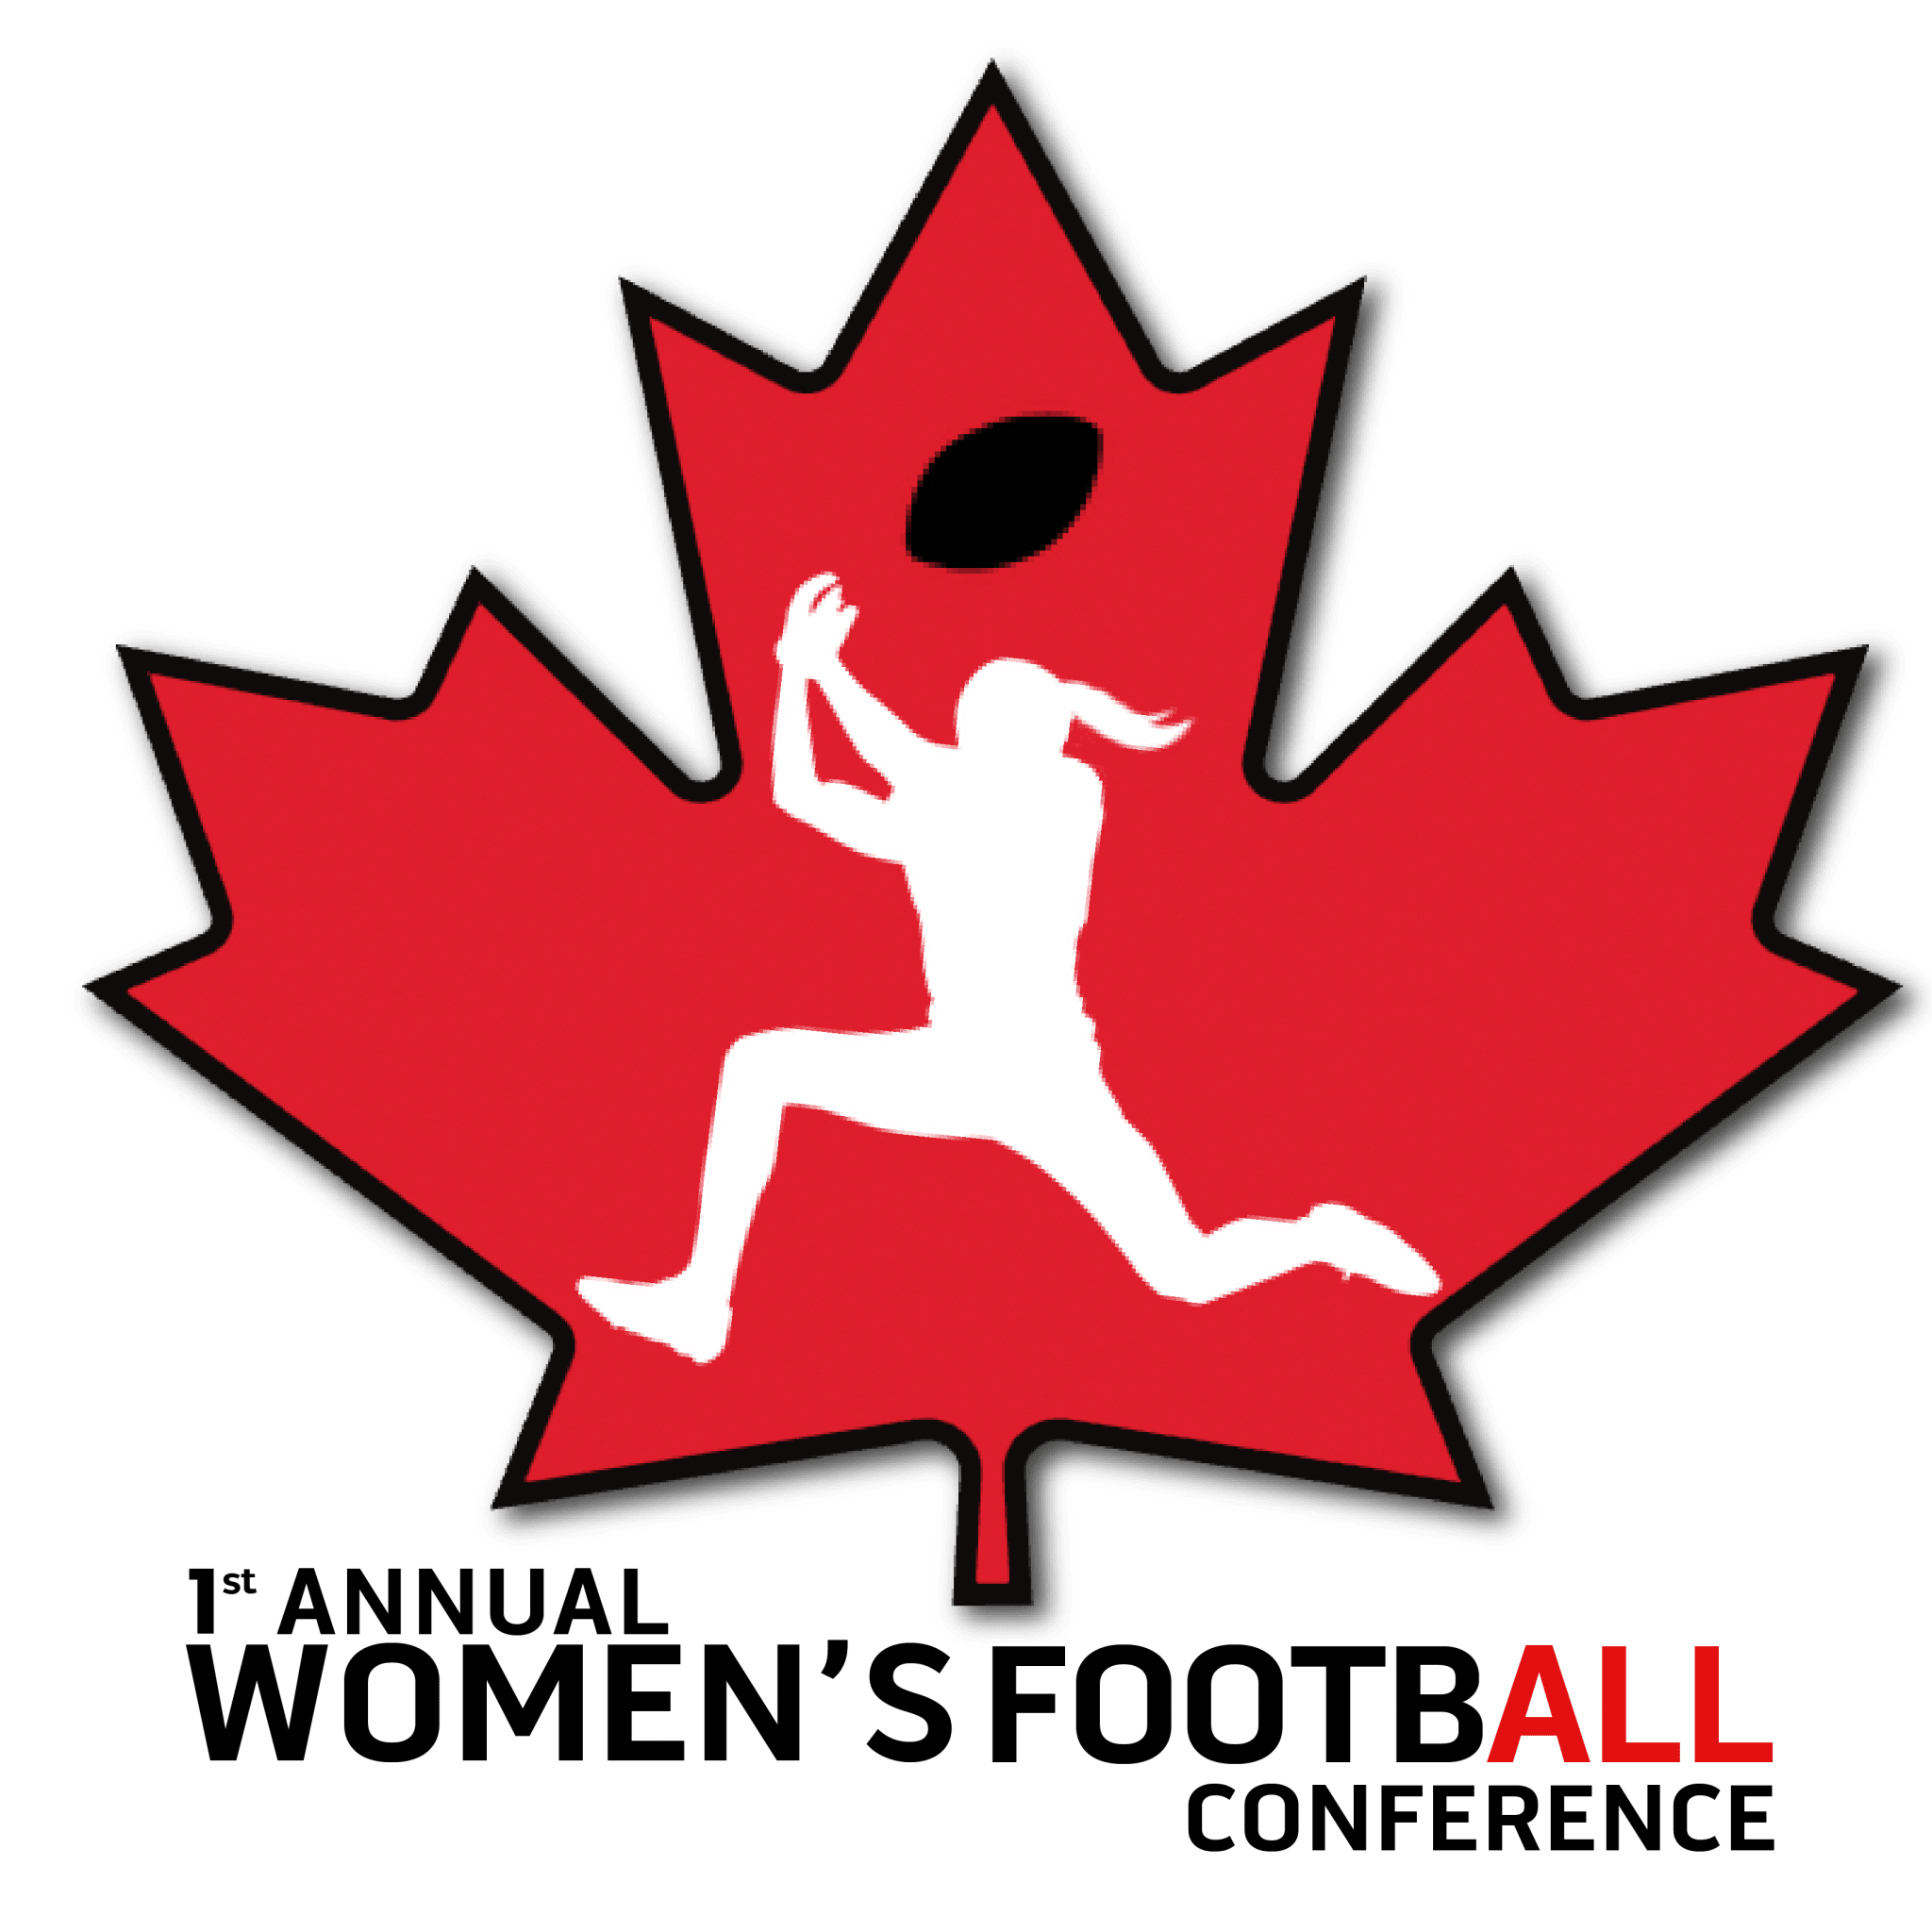 Women's FootbALL Conference